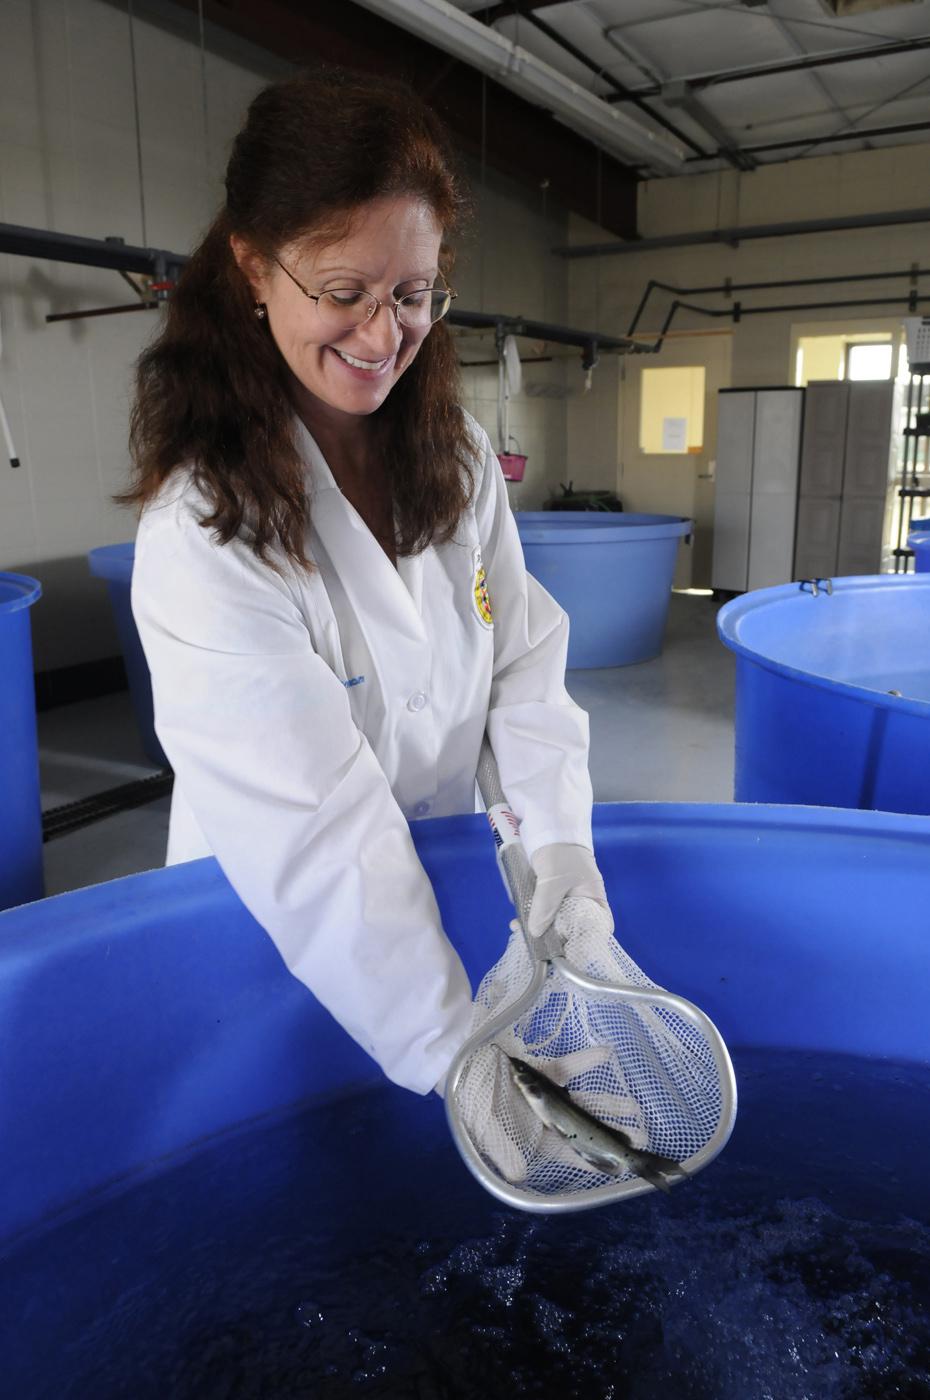 Dr. Lora Petrie-Hanson, an associate professor of immunology in MSU's College of Veterinary Medicine, examines a channel catfish raised for aquaculture disease research in the university's fish hatchery. (Photo by Tom Thompson)